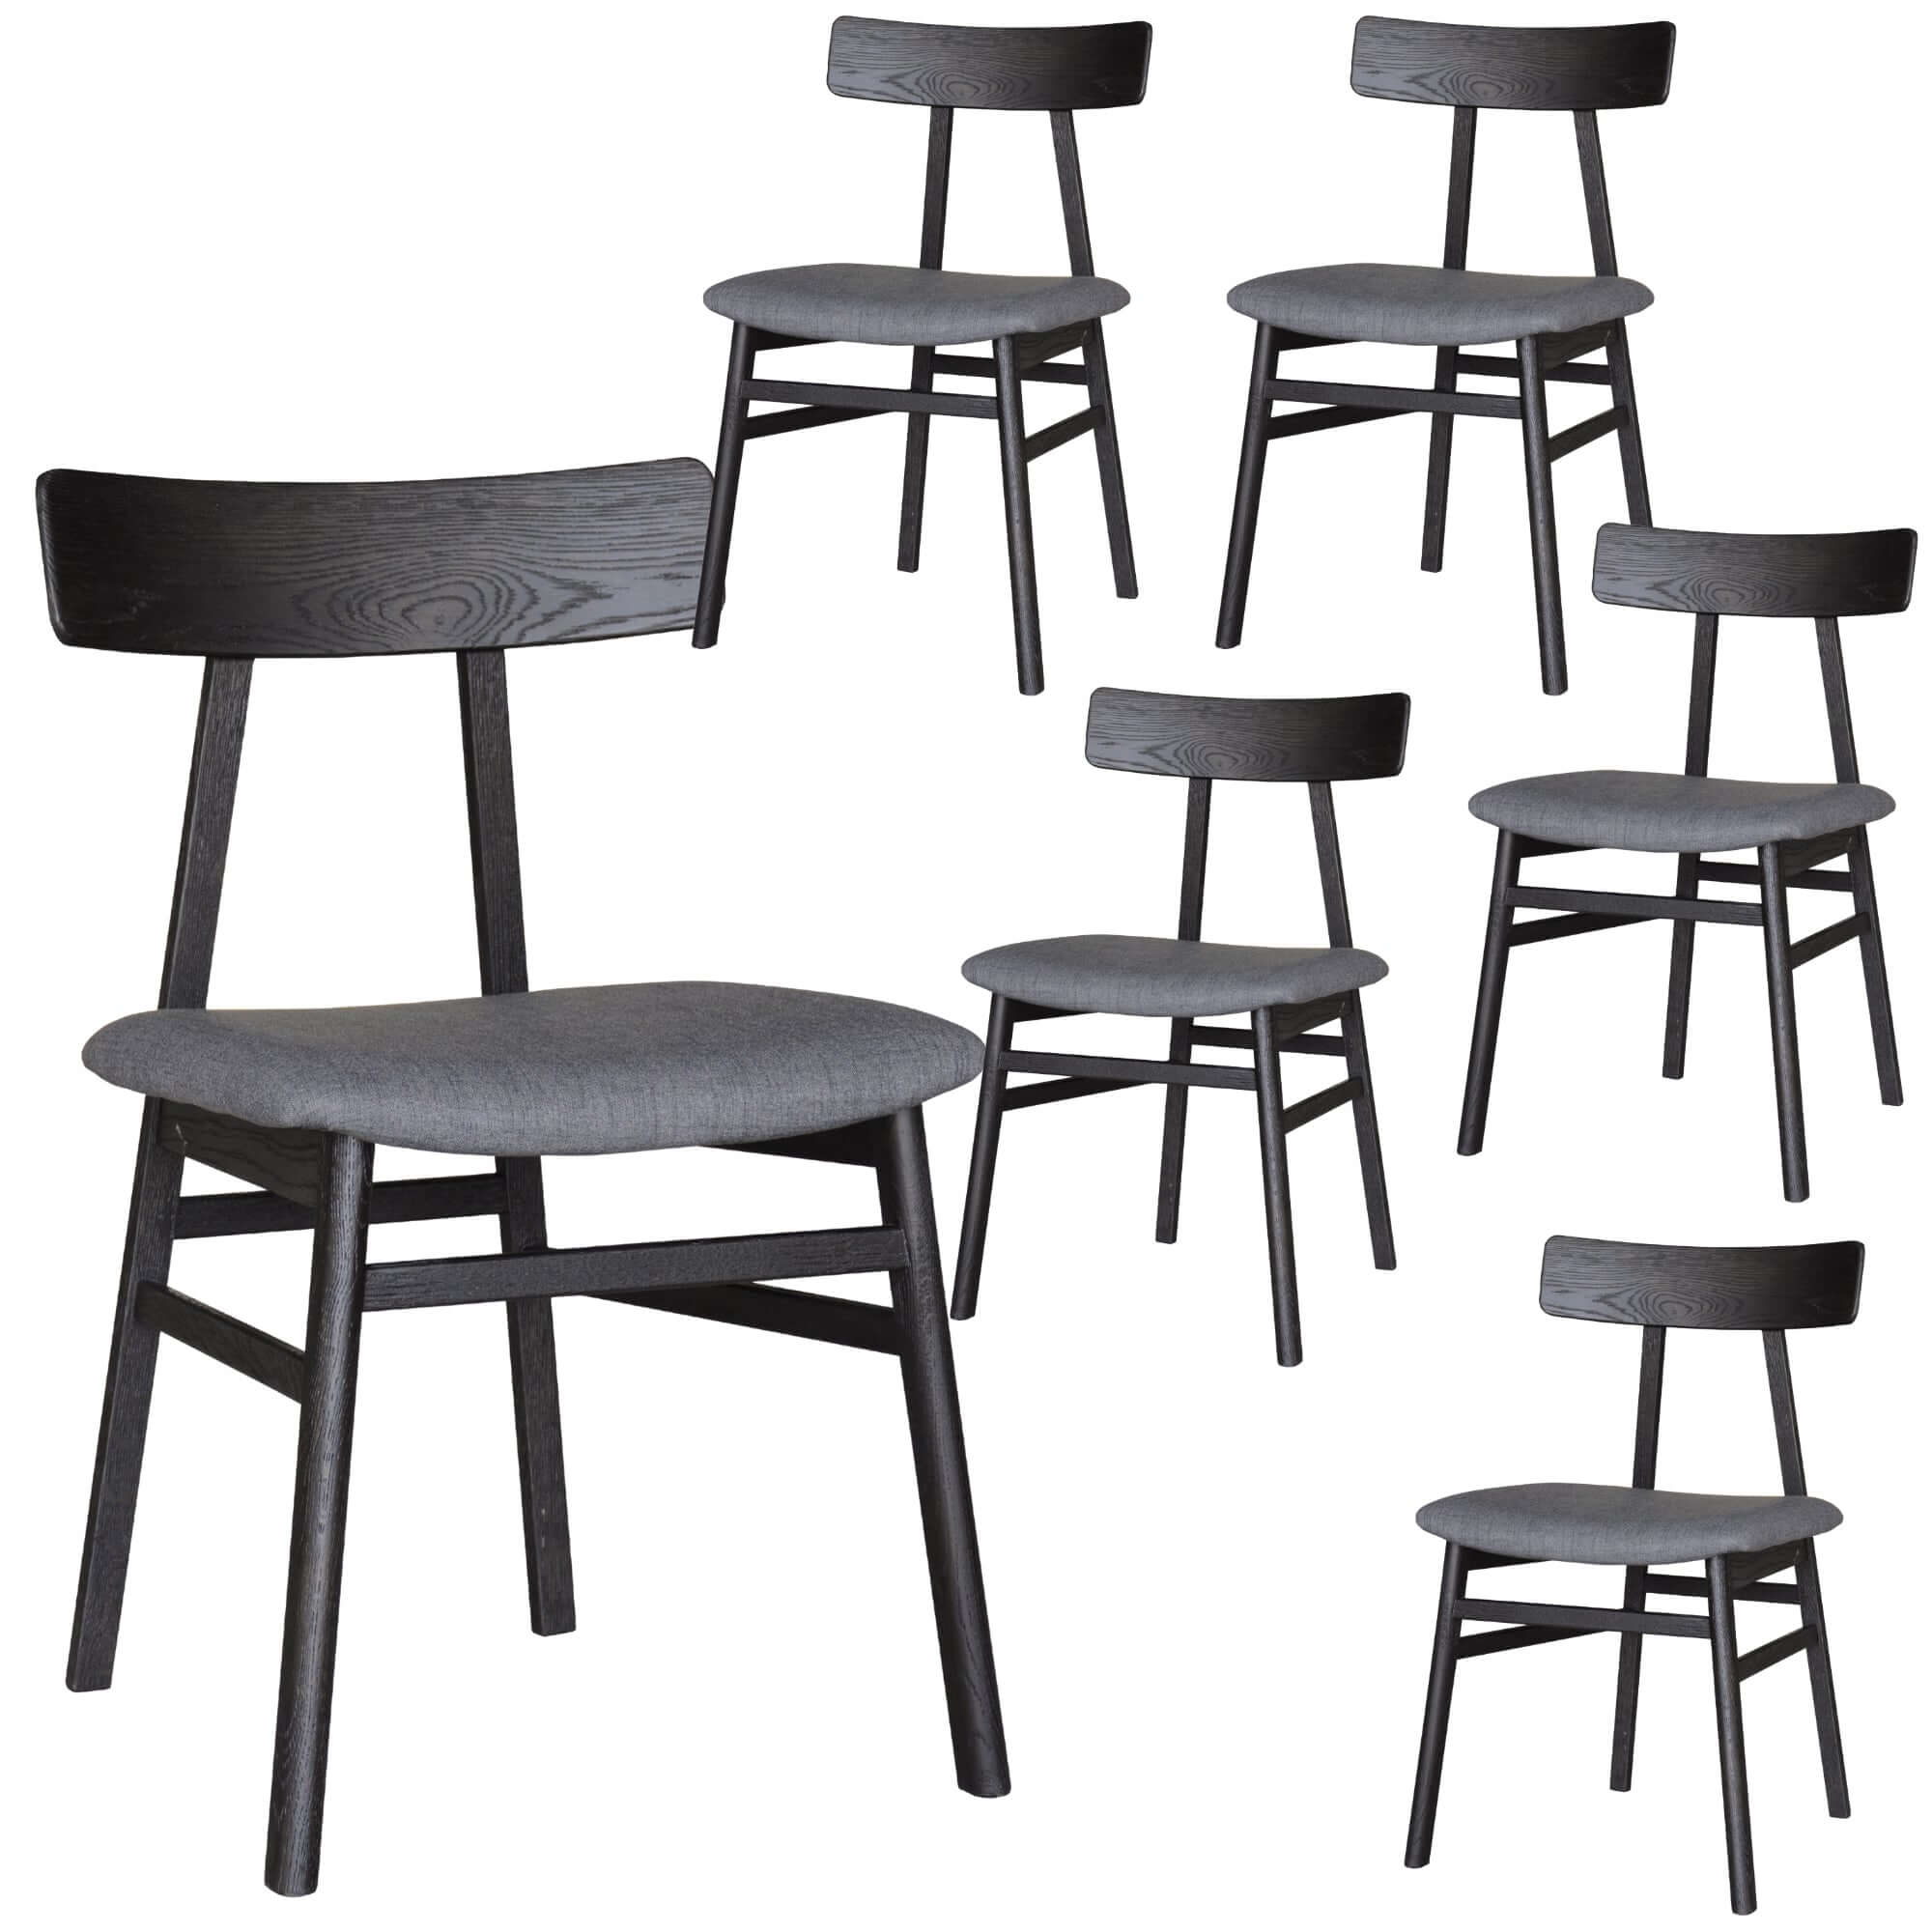 Claire Oak Dining Chairs (6-Piece Set) - Black Fabric-Upinteriors